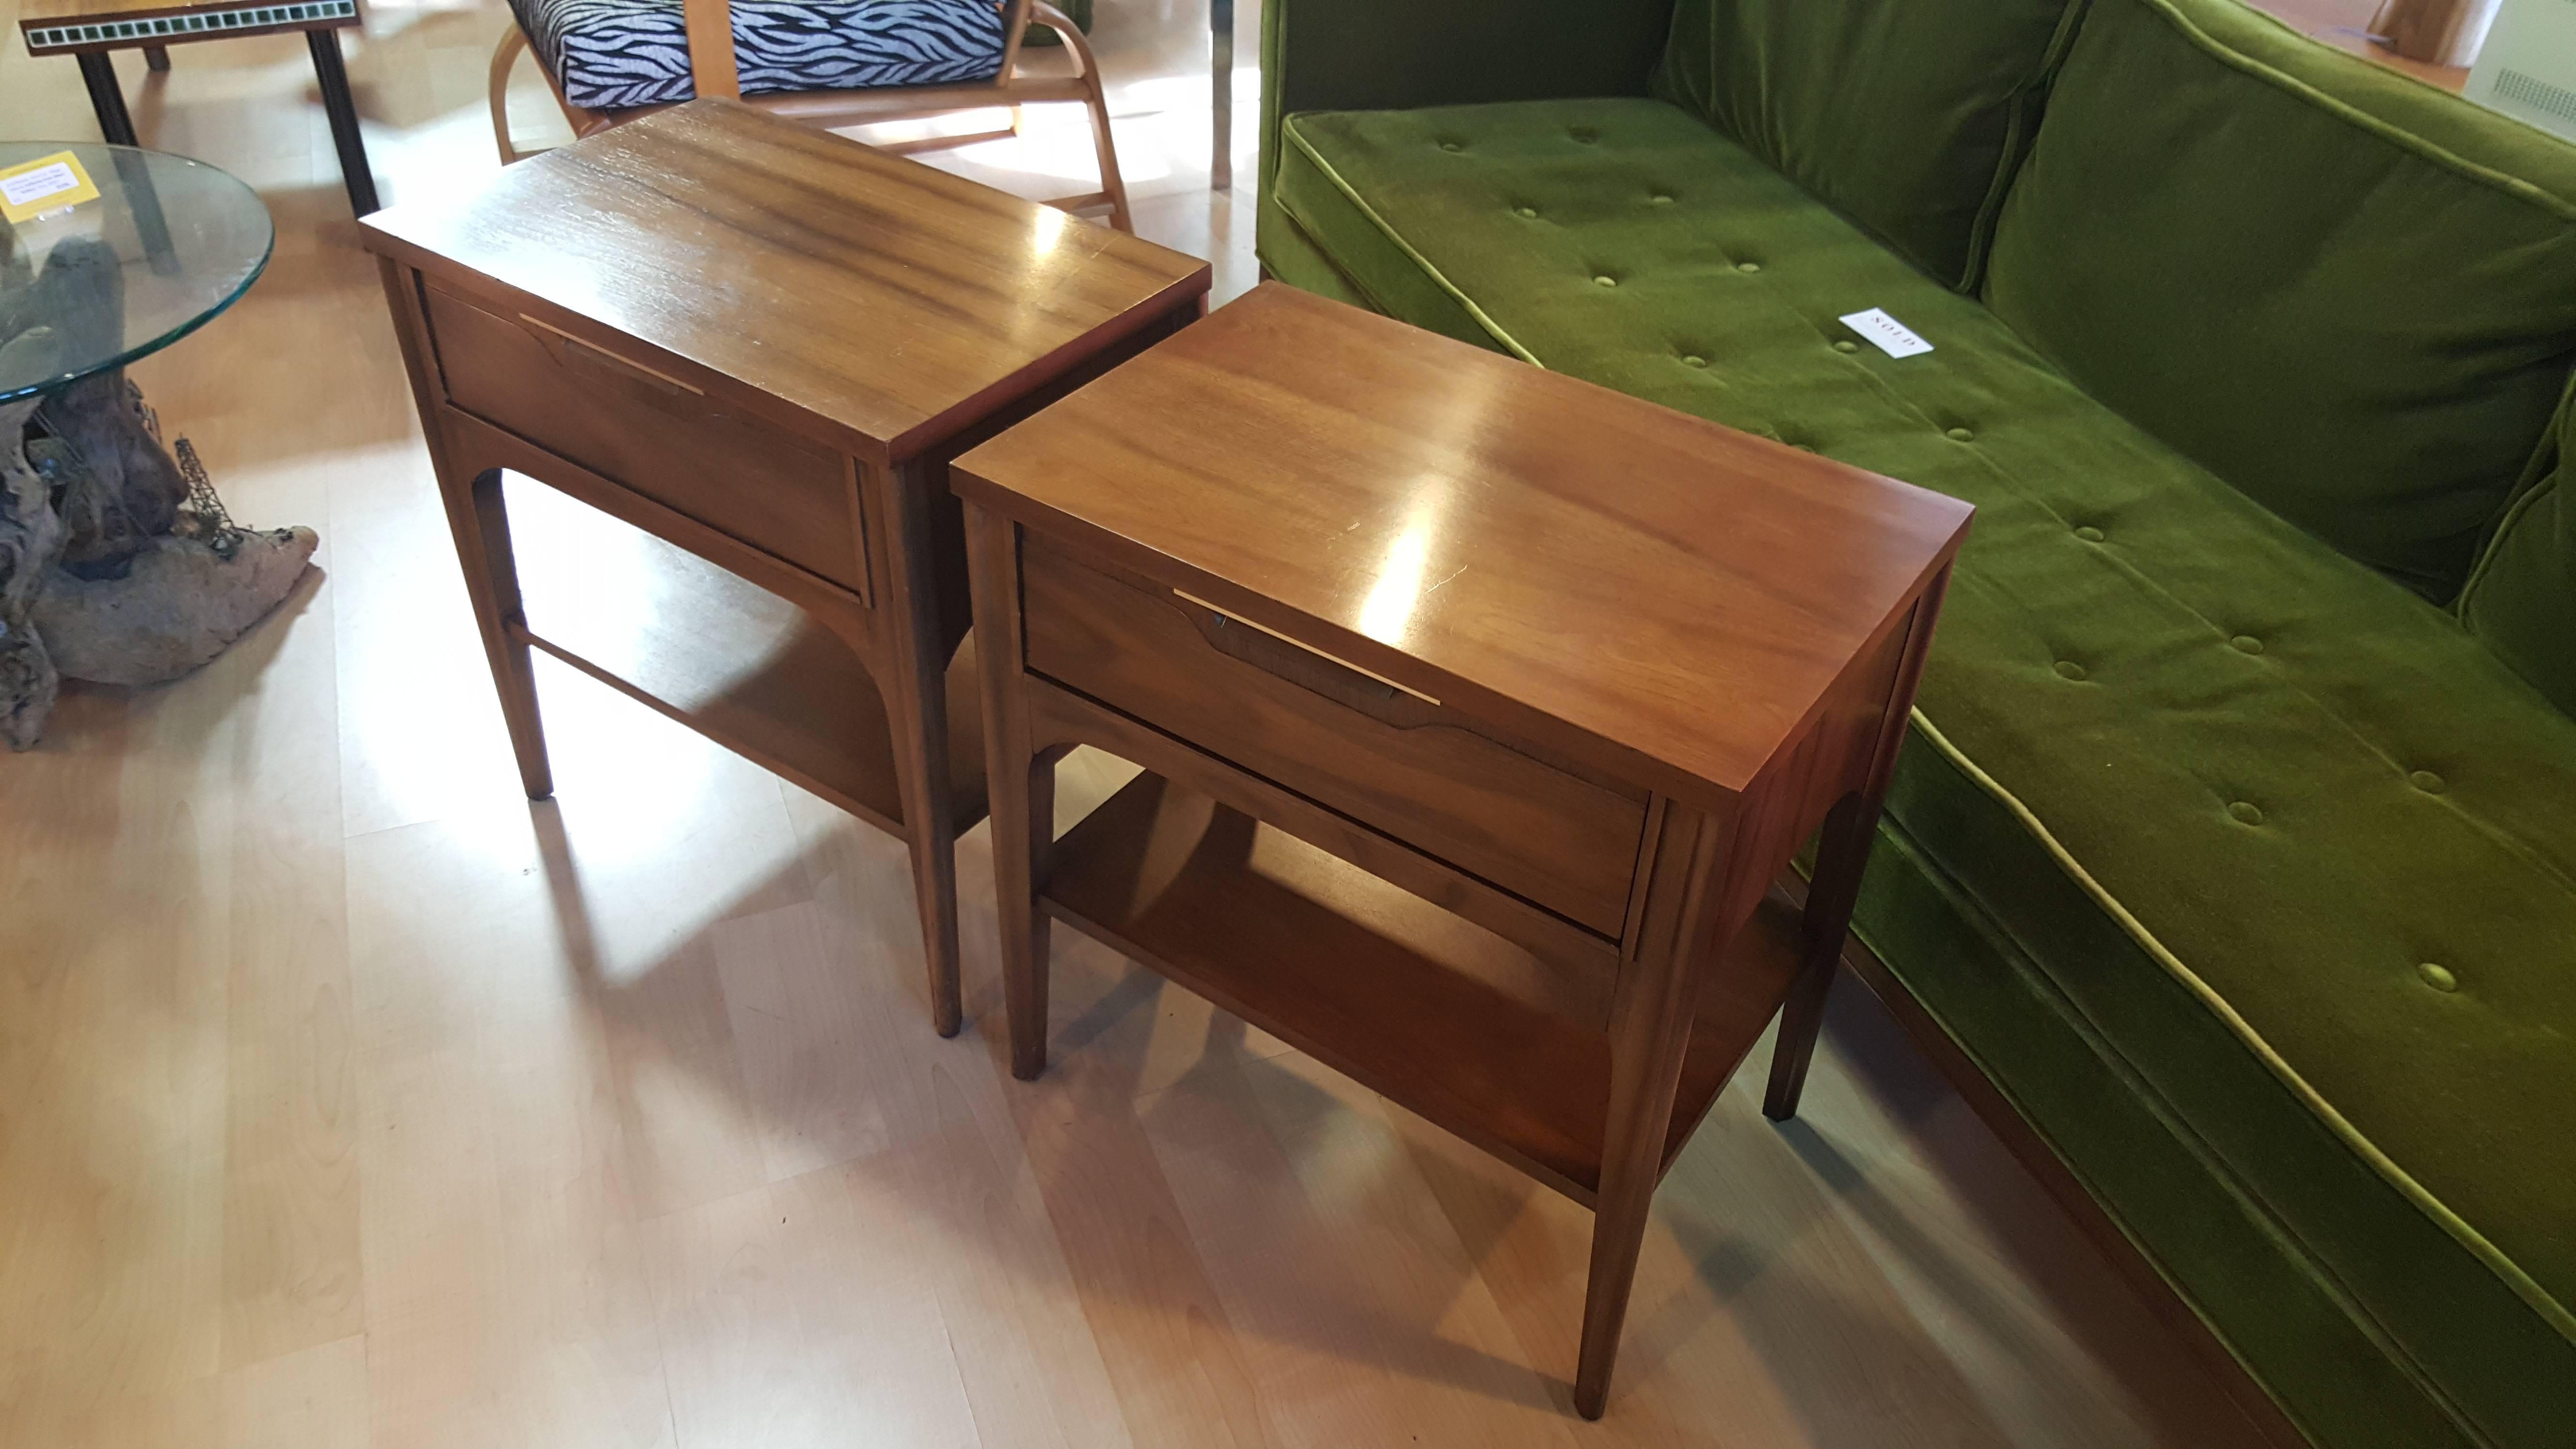 Fine materials and craftsmanship in these Mid-Century Modern walnut end tables by Kent Coffey. Solid oak secondary woods and dovetail construction. Nice original condition and finish. Each table features and single top drawer and magazine shelf.